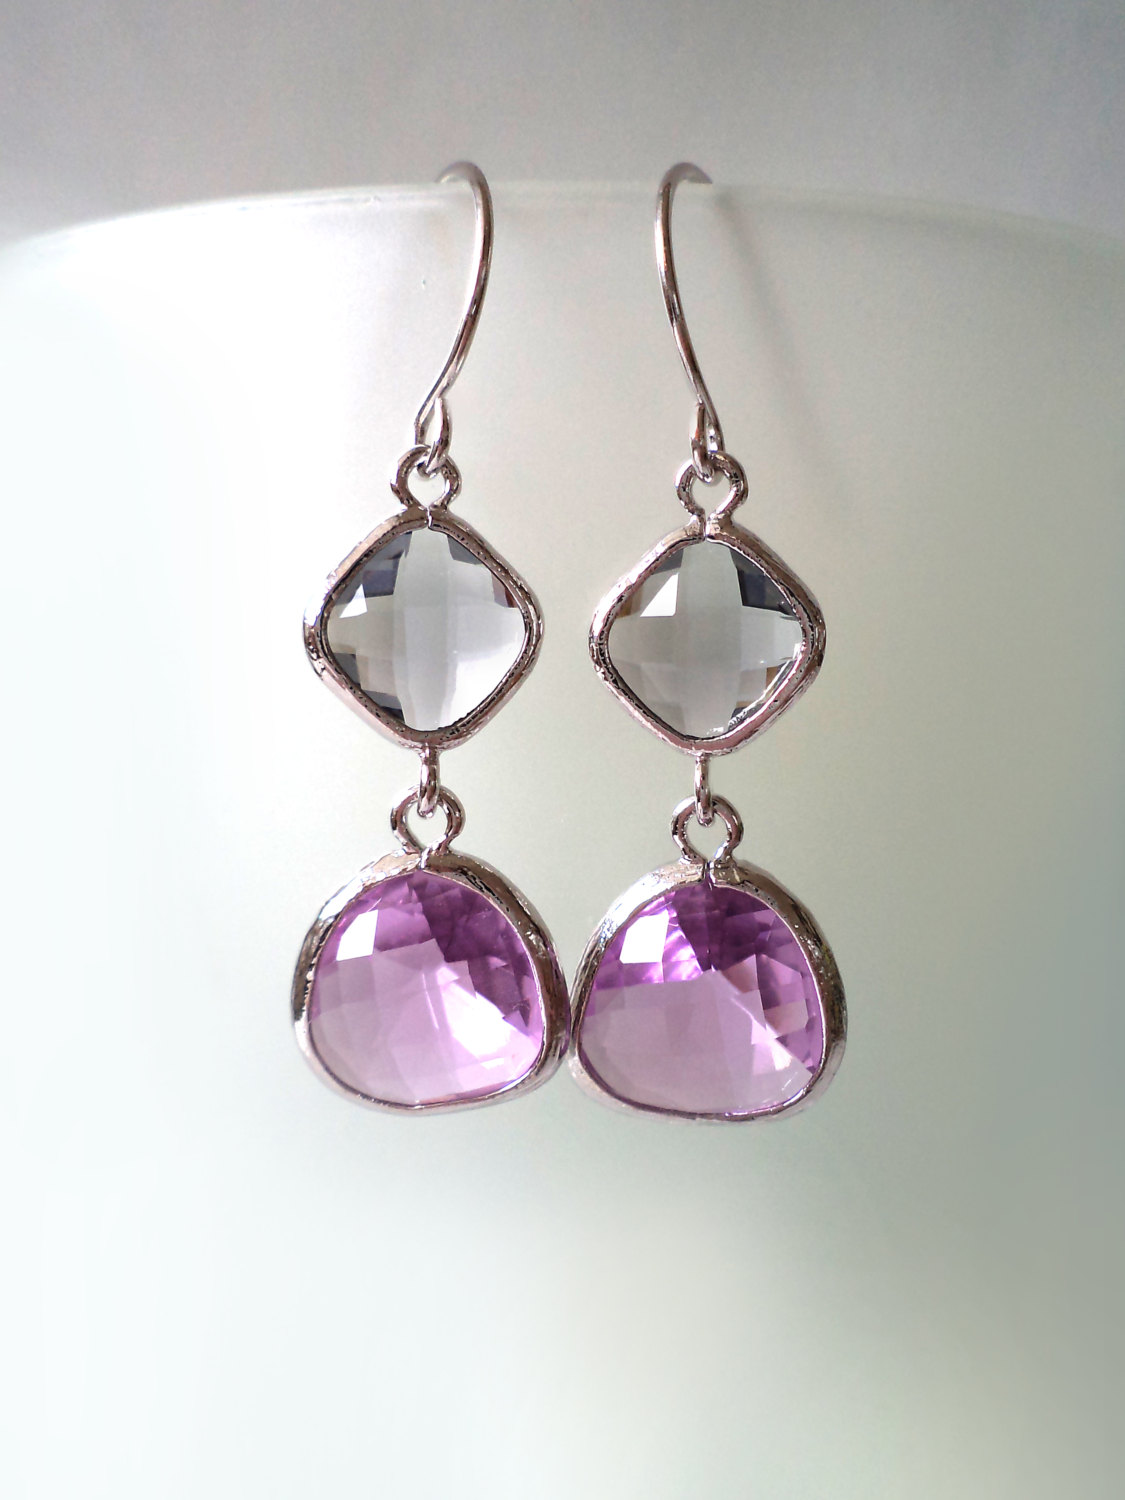 Charcoal And Purple Crystal Earrings. Lilac And Grey Dangles. Grey And Lavender Chandeliers. Bridal, Bridesmaids Gifts.